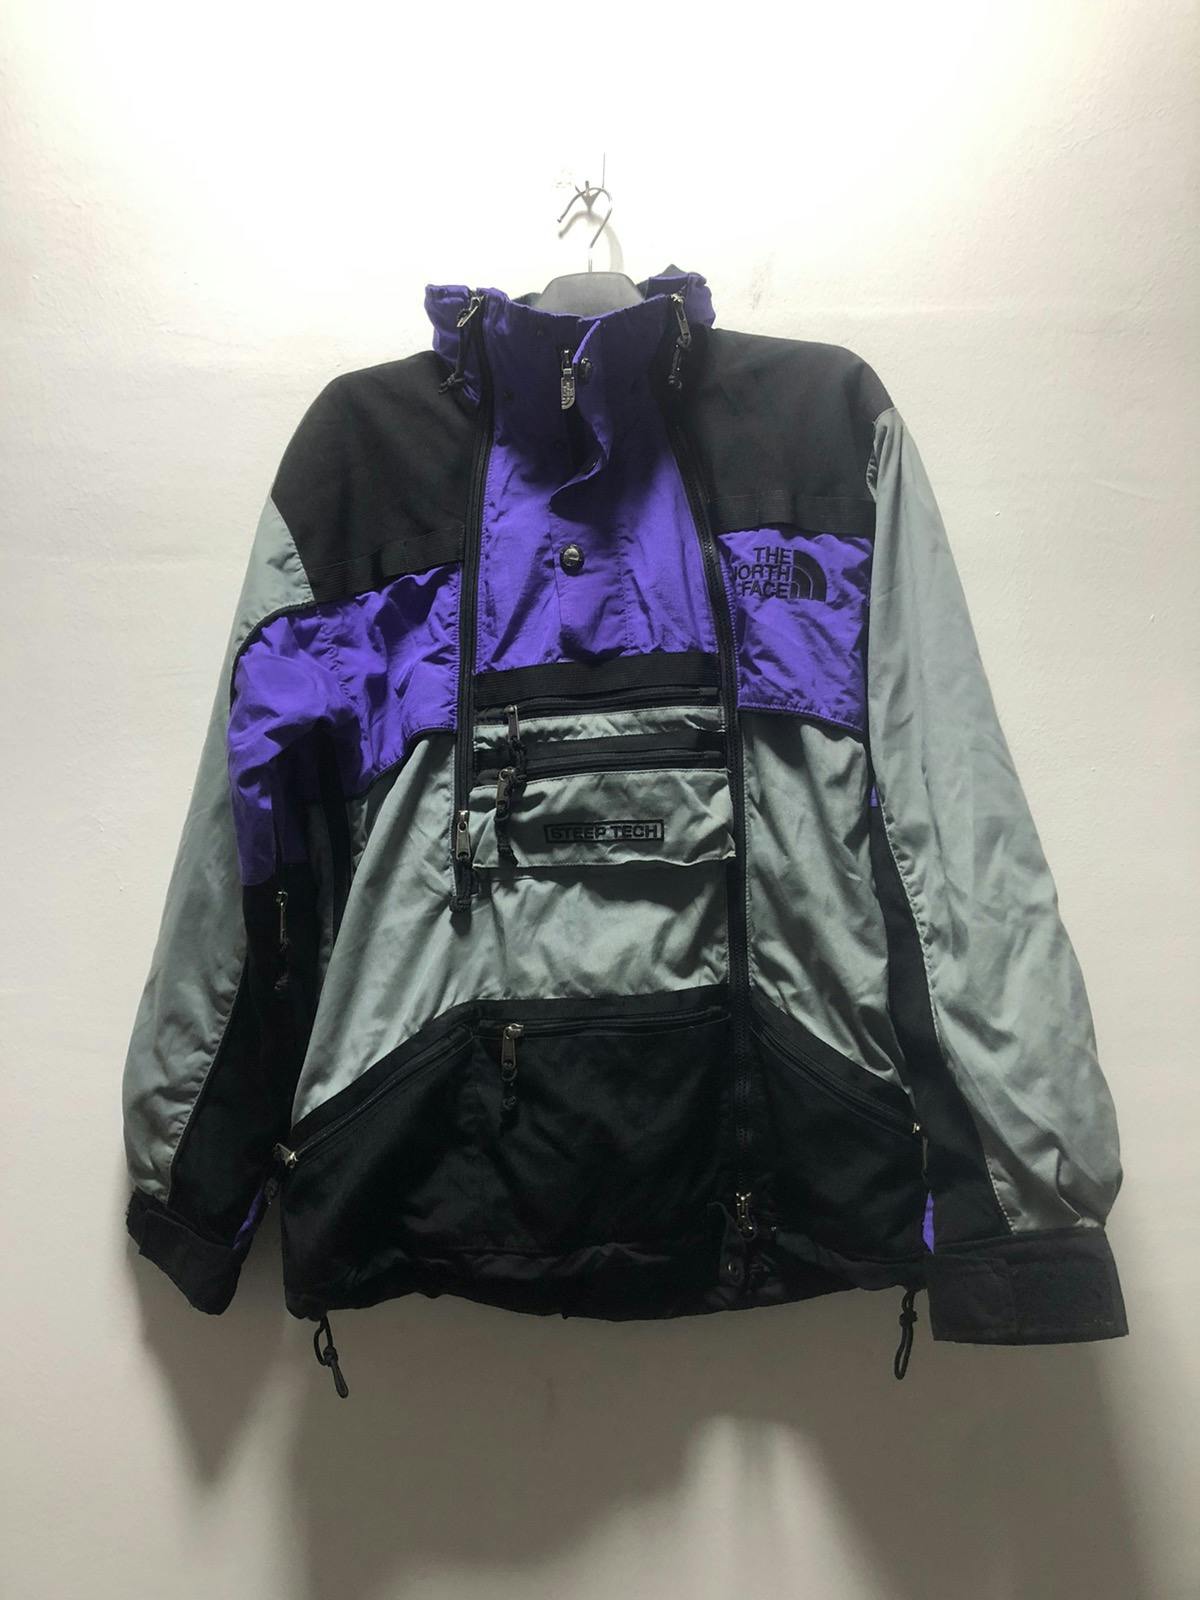 Vintage THE NORTH FACE Steep Tech Jacket Scot Scmidt - 1